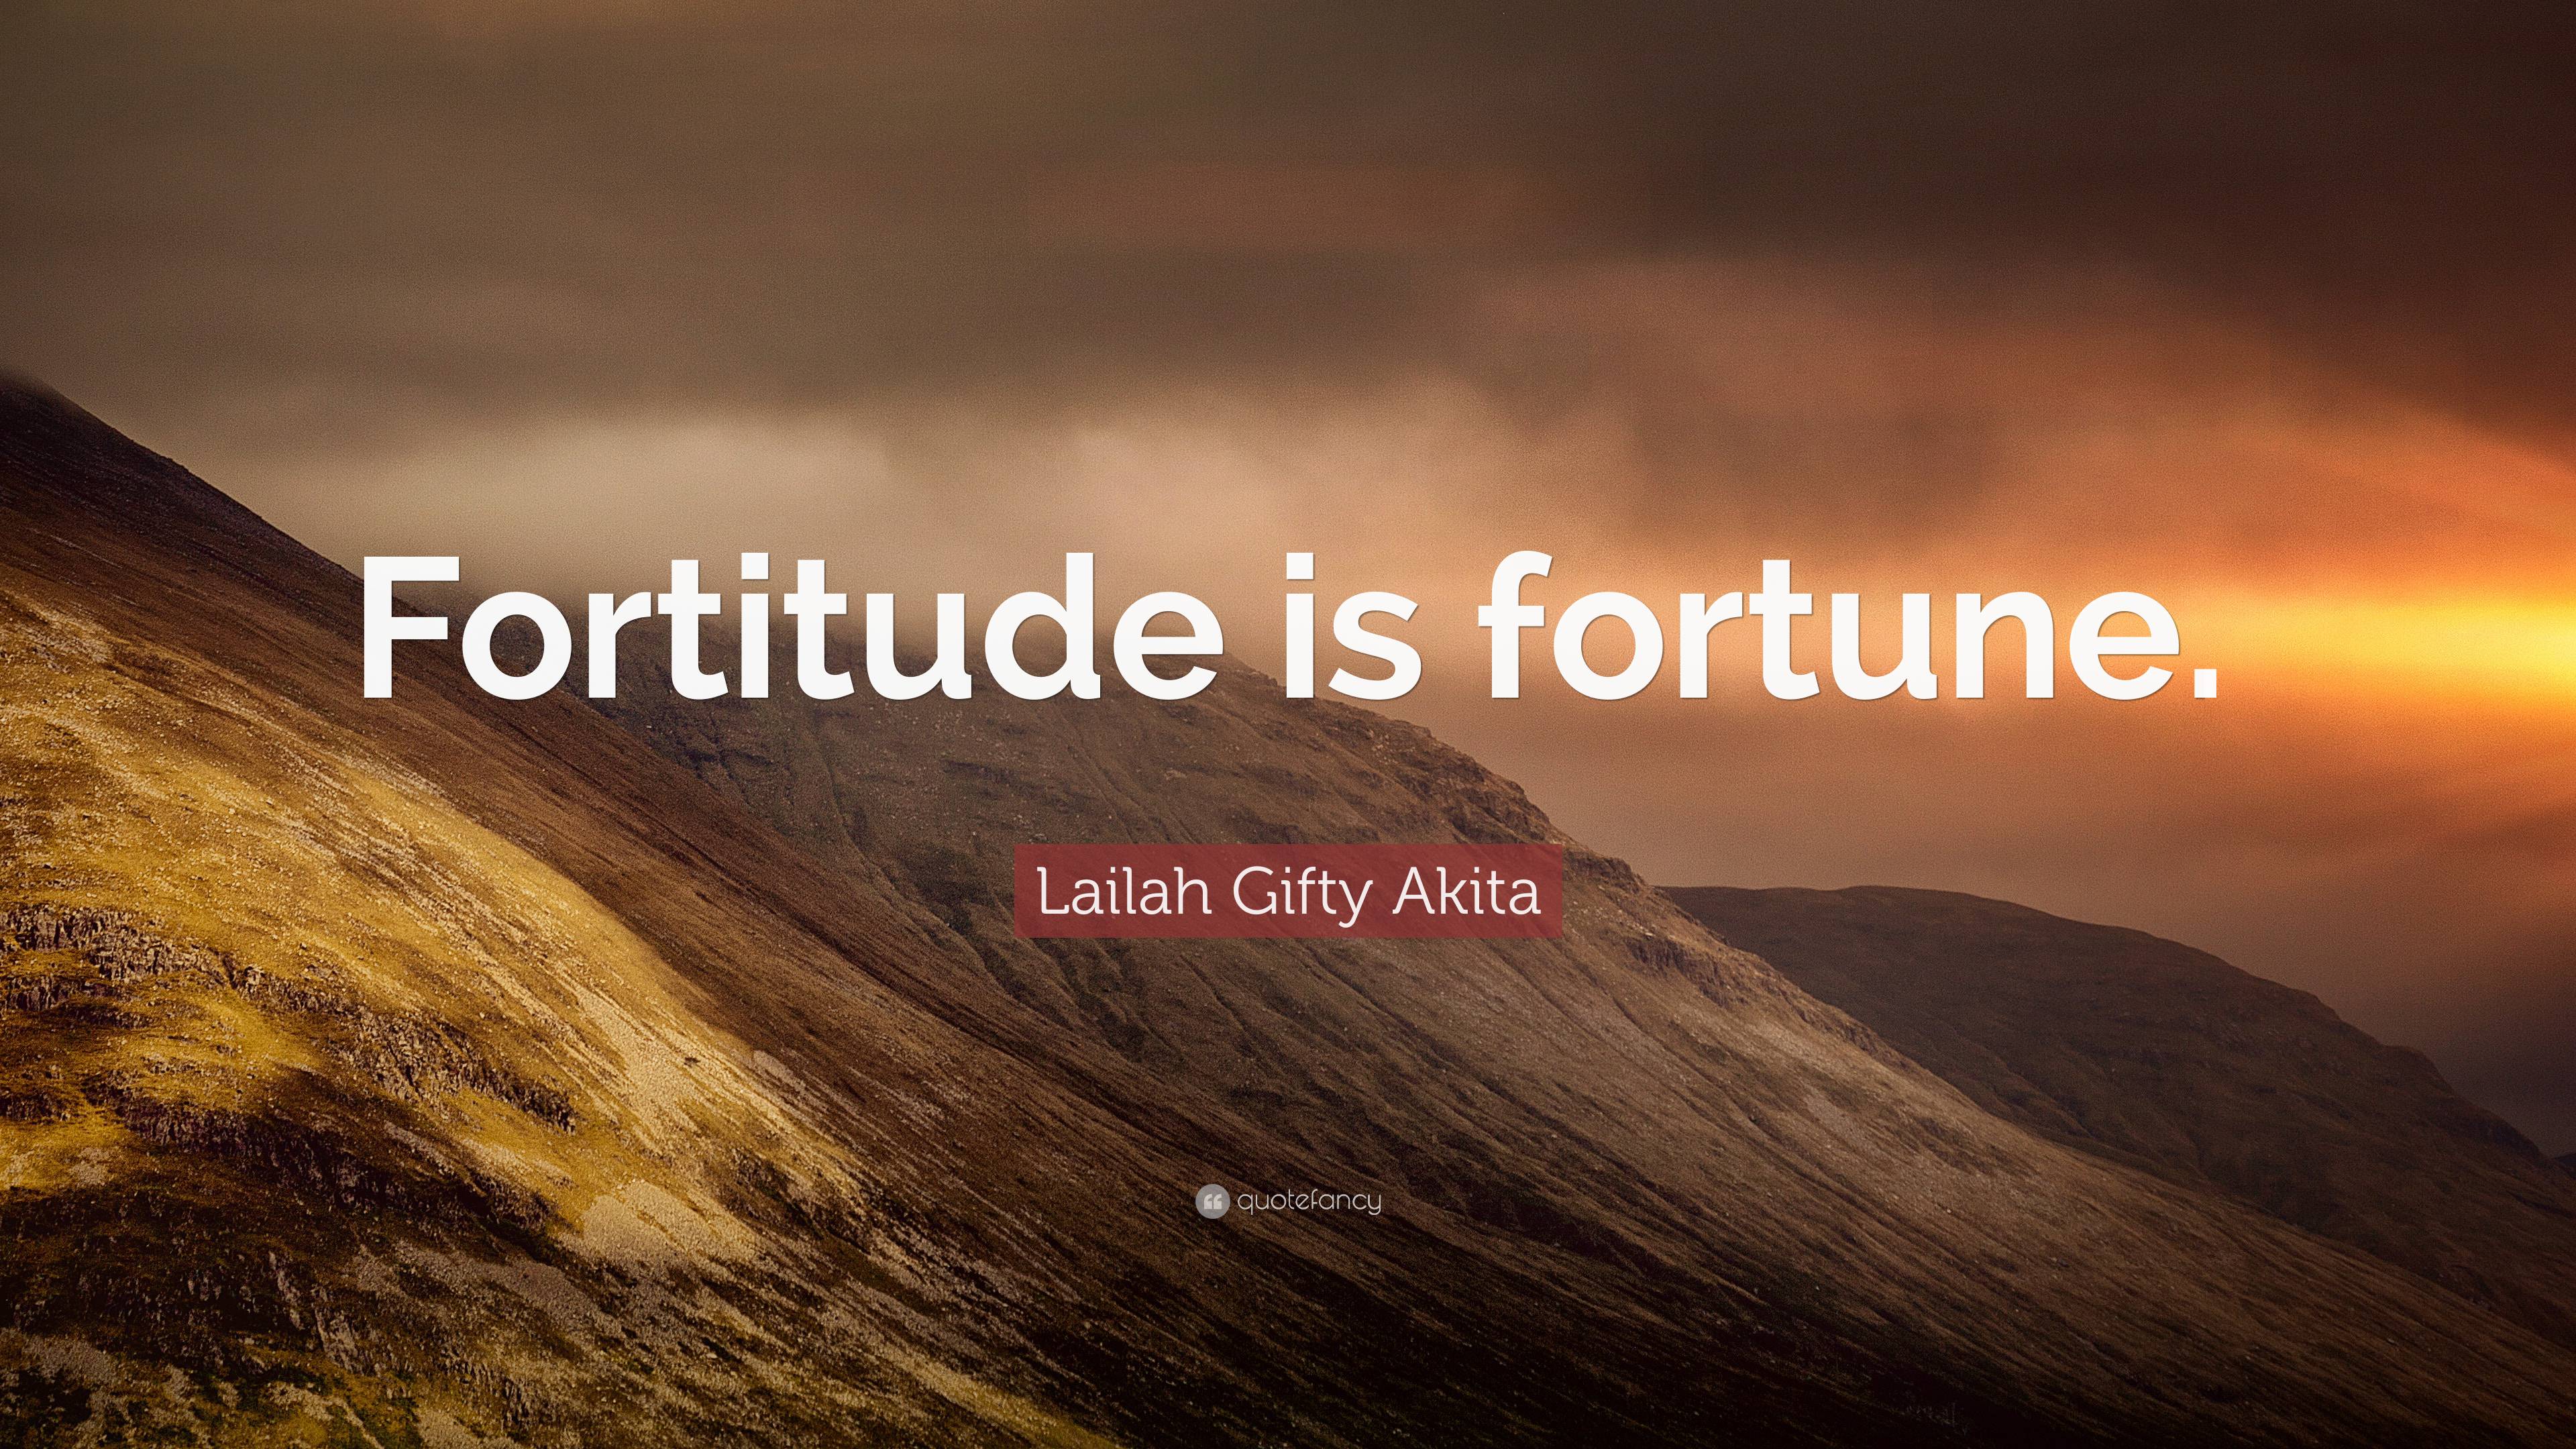 Lailah Gifty Akita Quote: “Fortitude is fortune.”